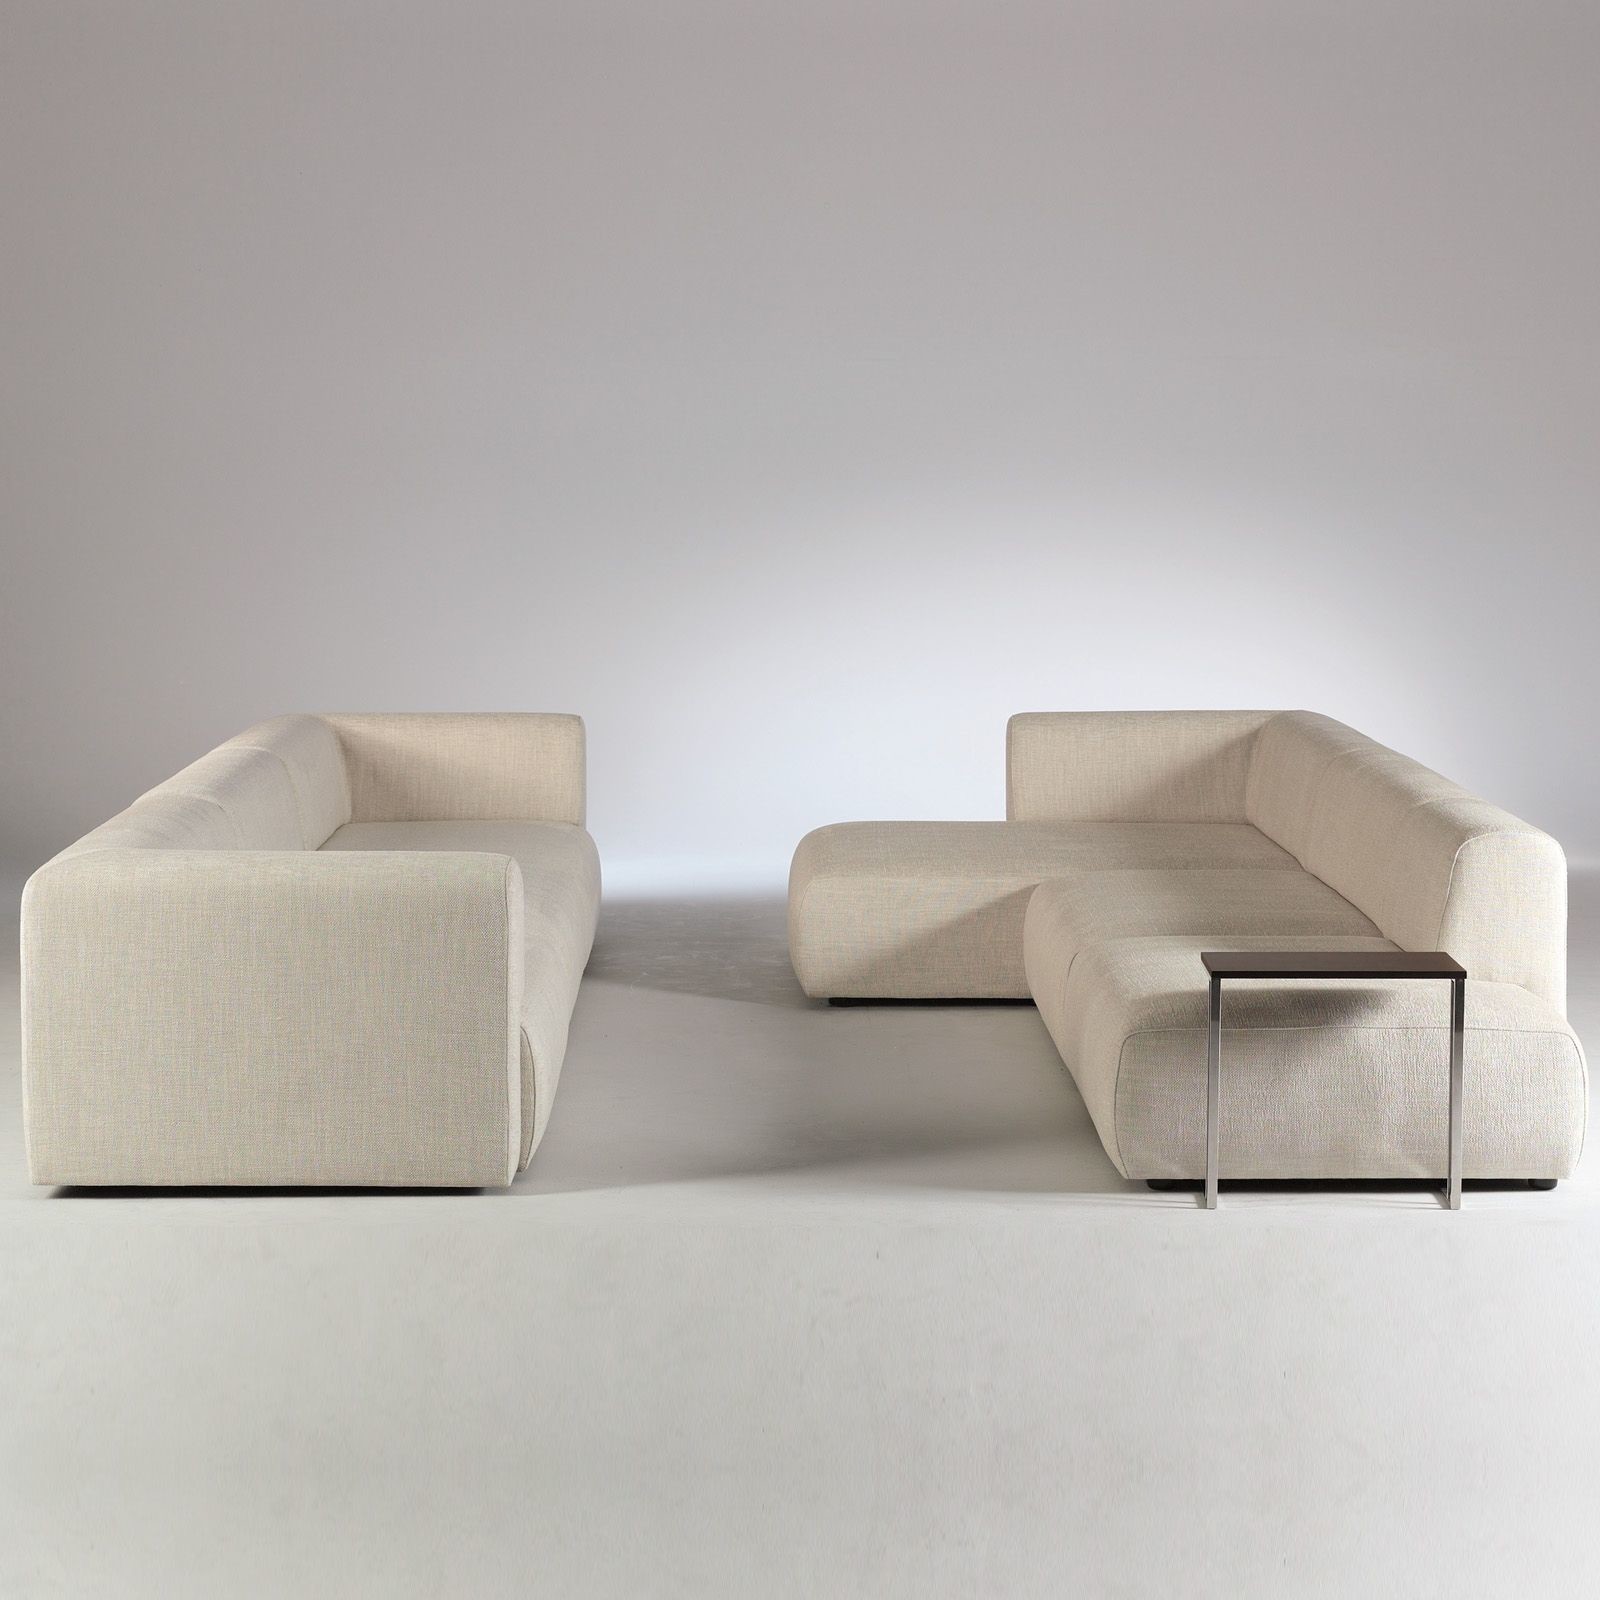 Duo by Sancal